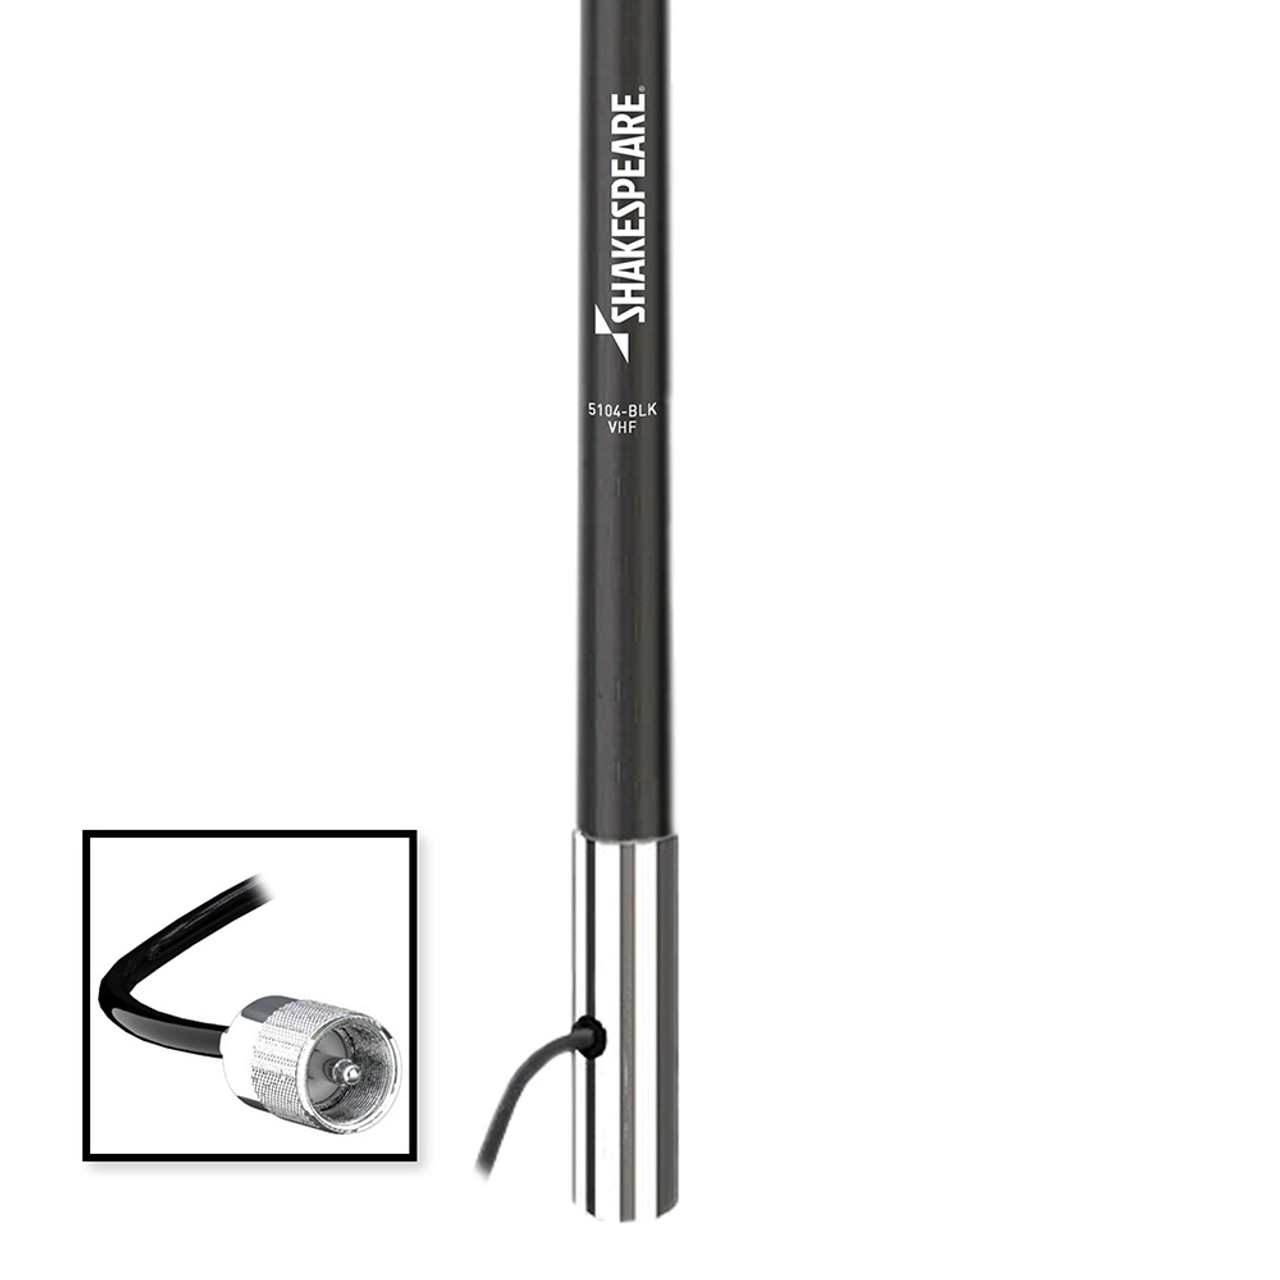 Shakespeare VHF 4 5104 Black Antenna Classic w\/15 RG-58 Cable [5104-BLK]